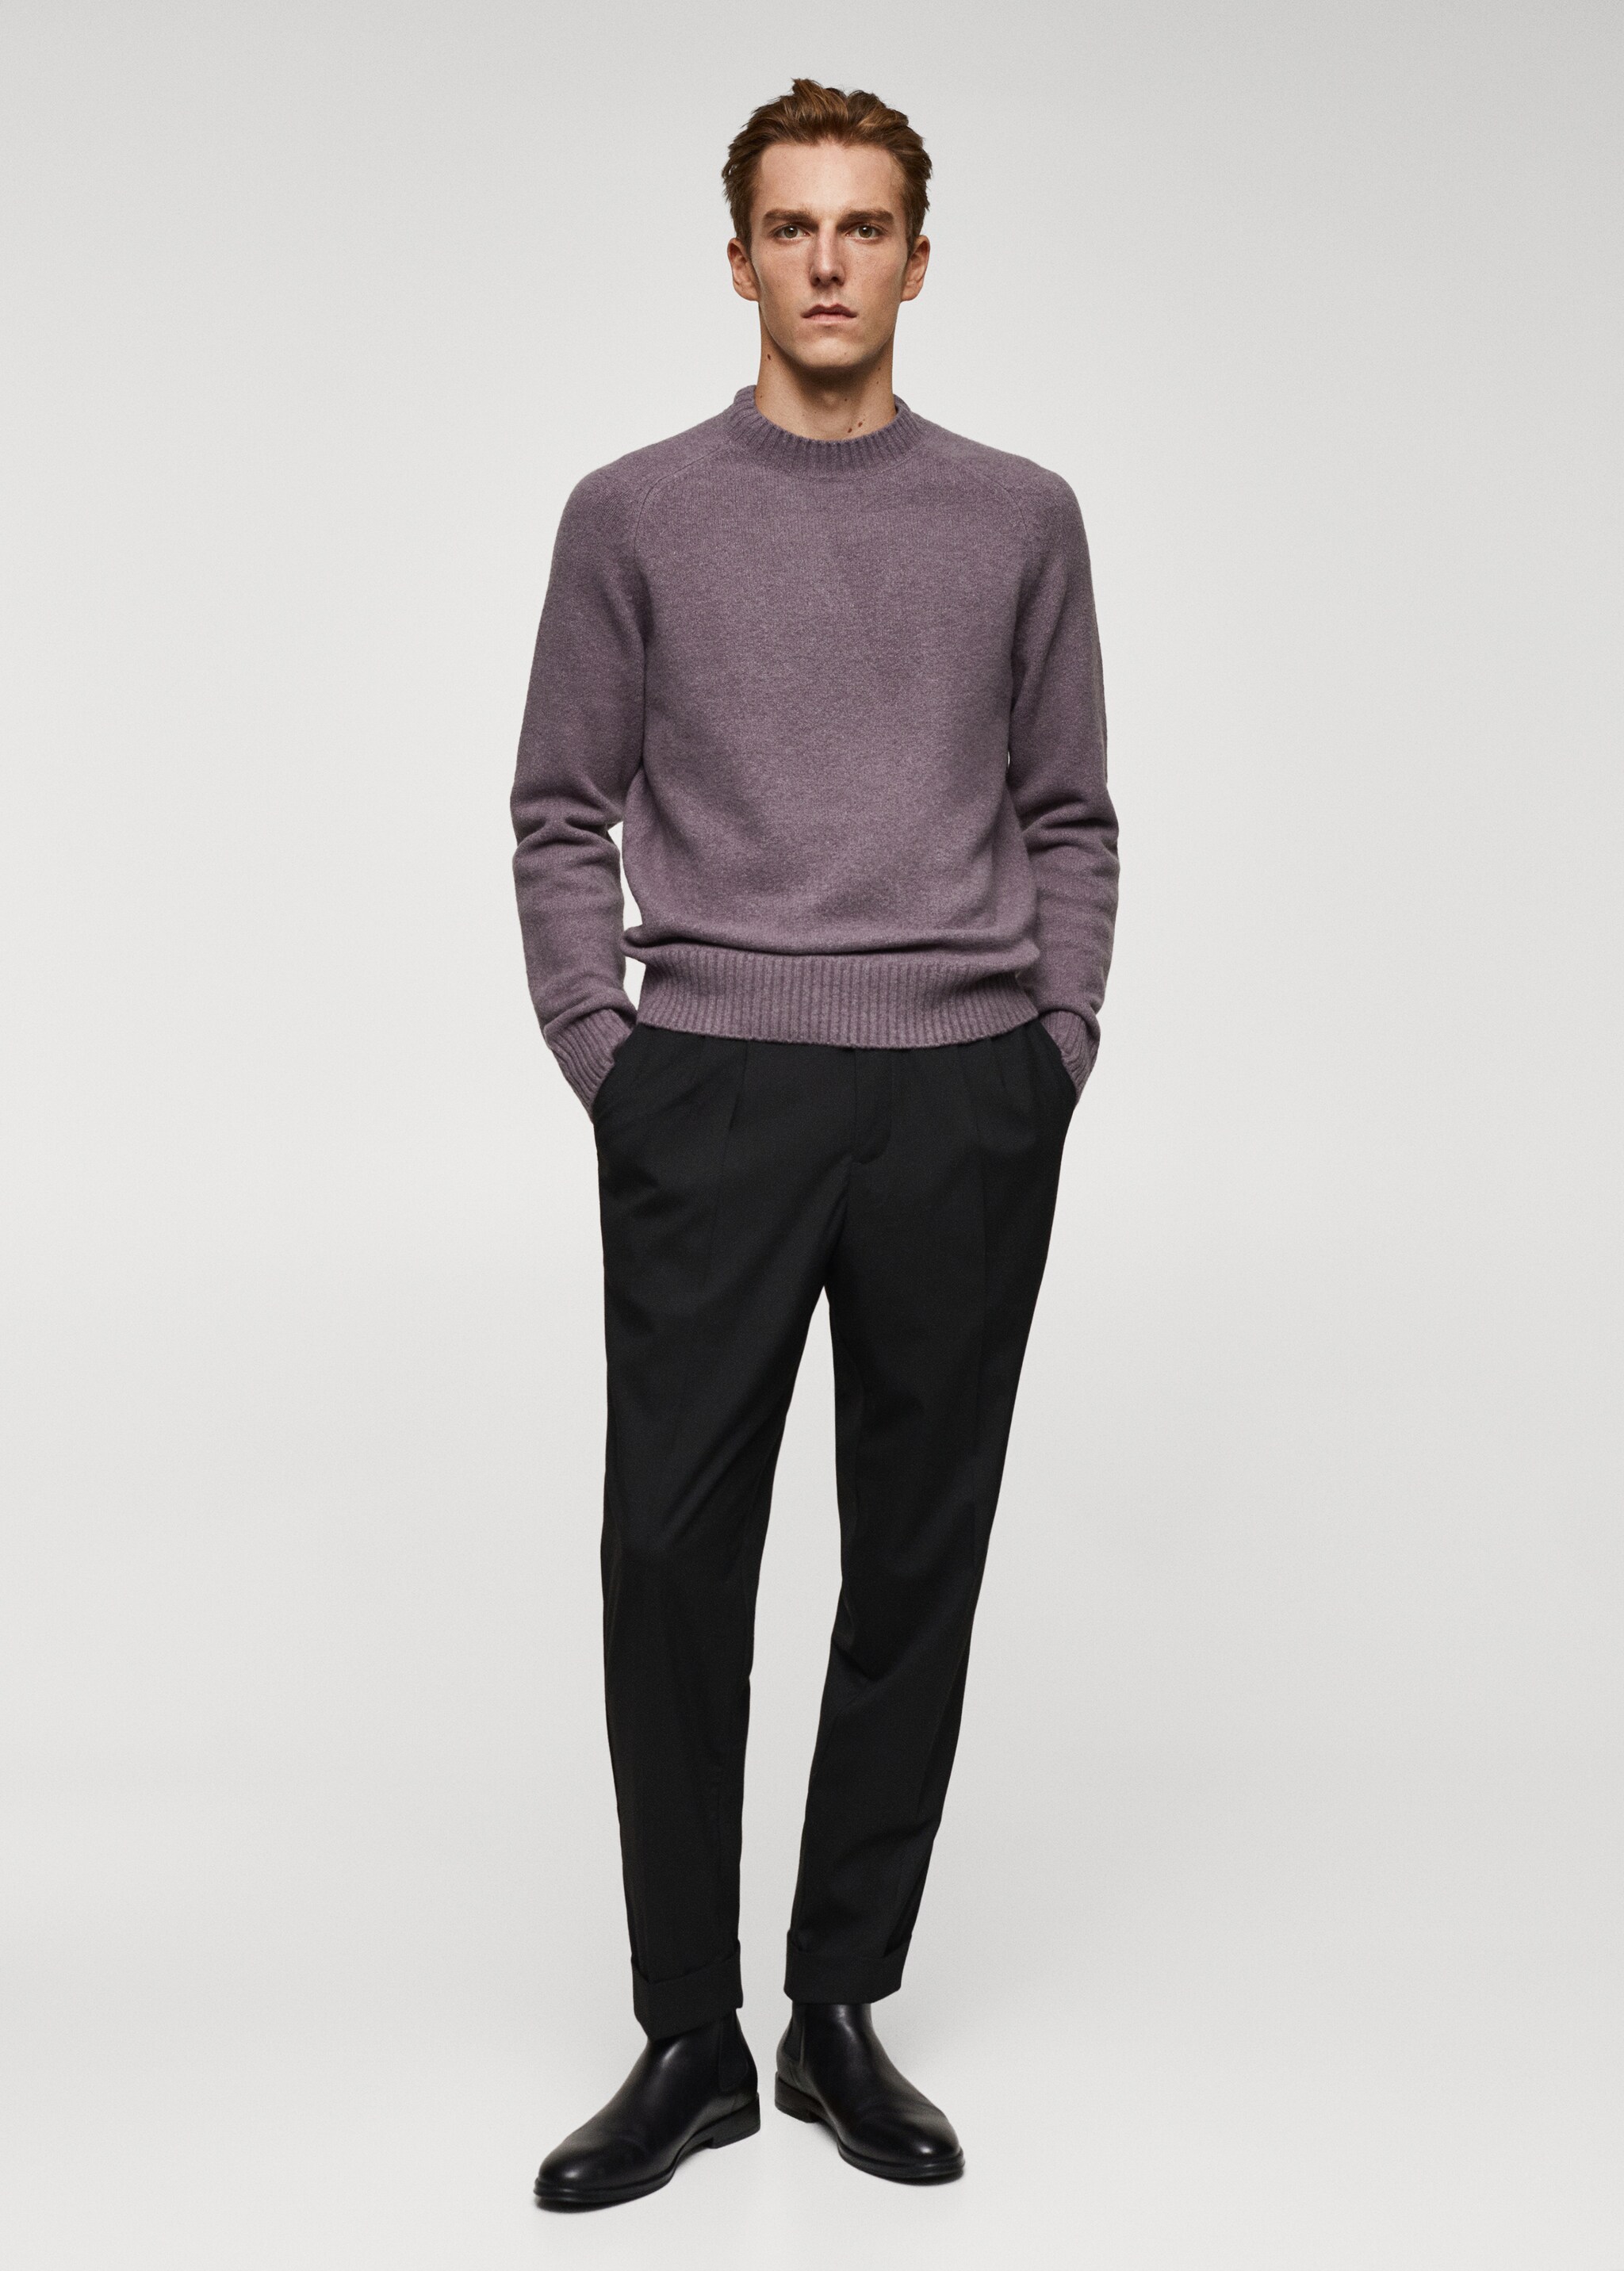 Knitted sweater with ribbed details - General plane